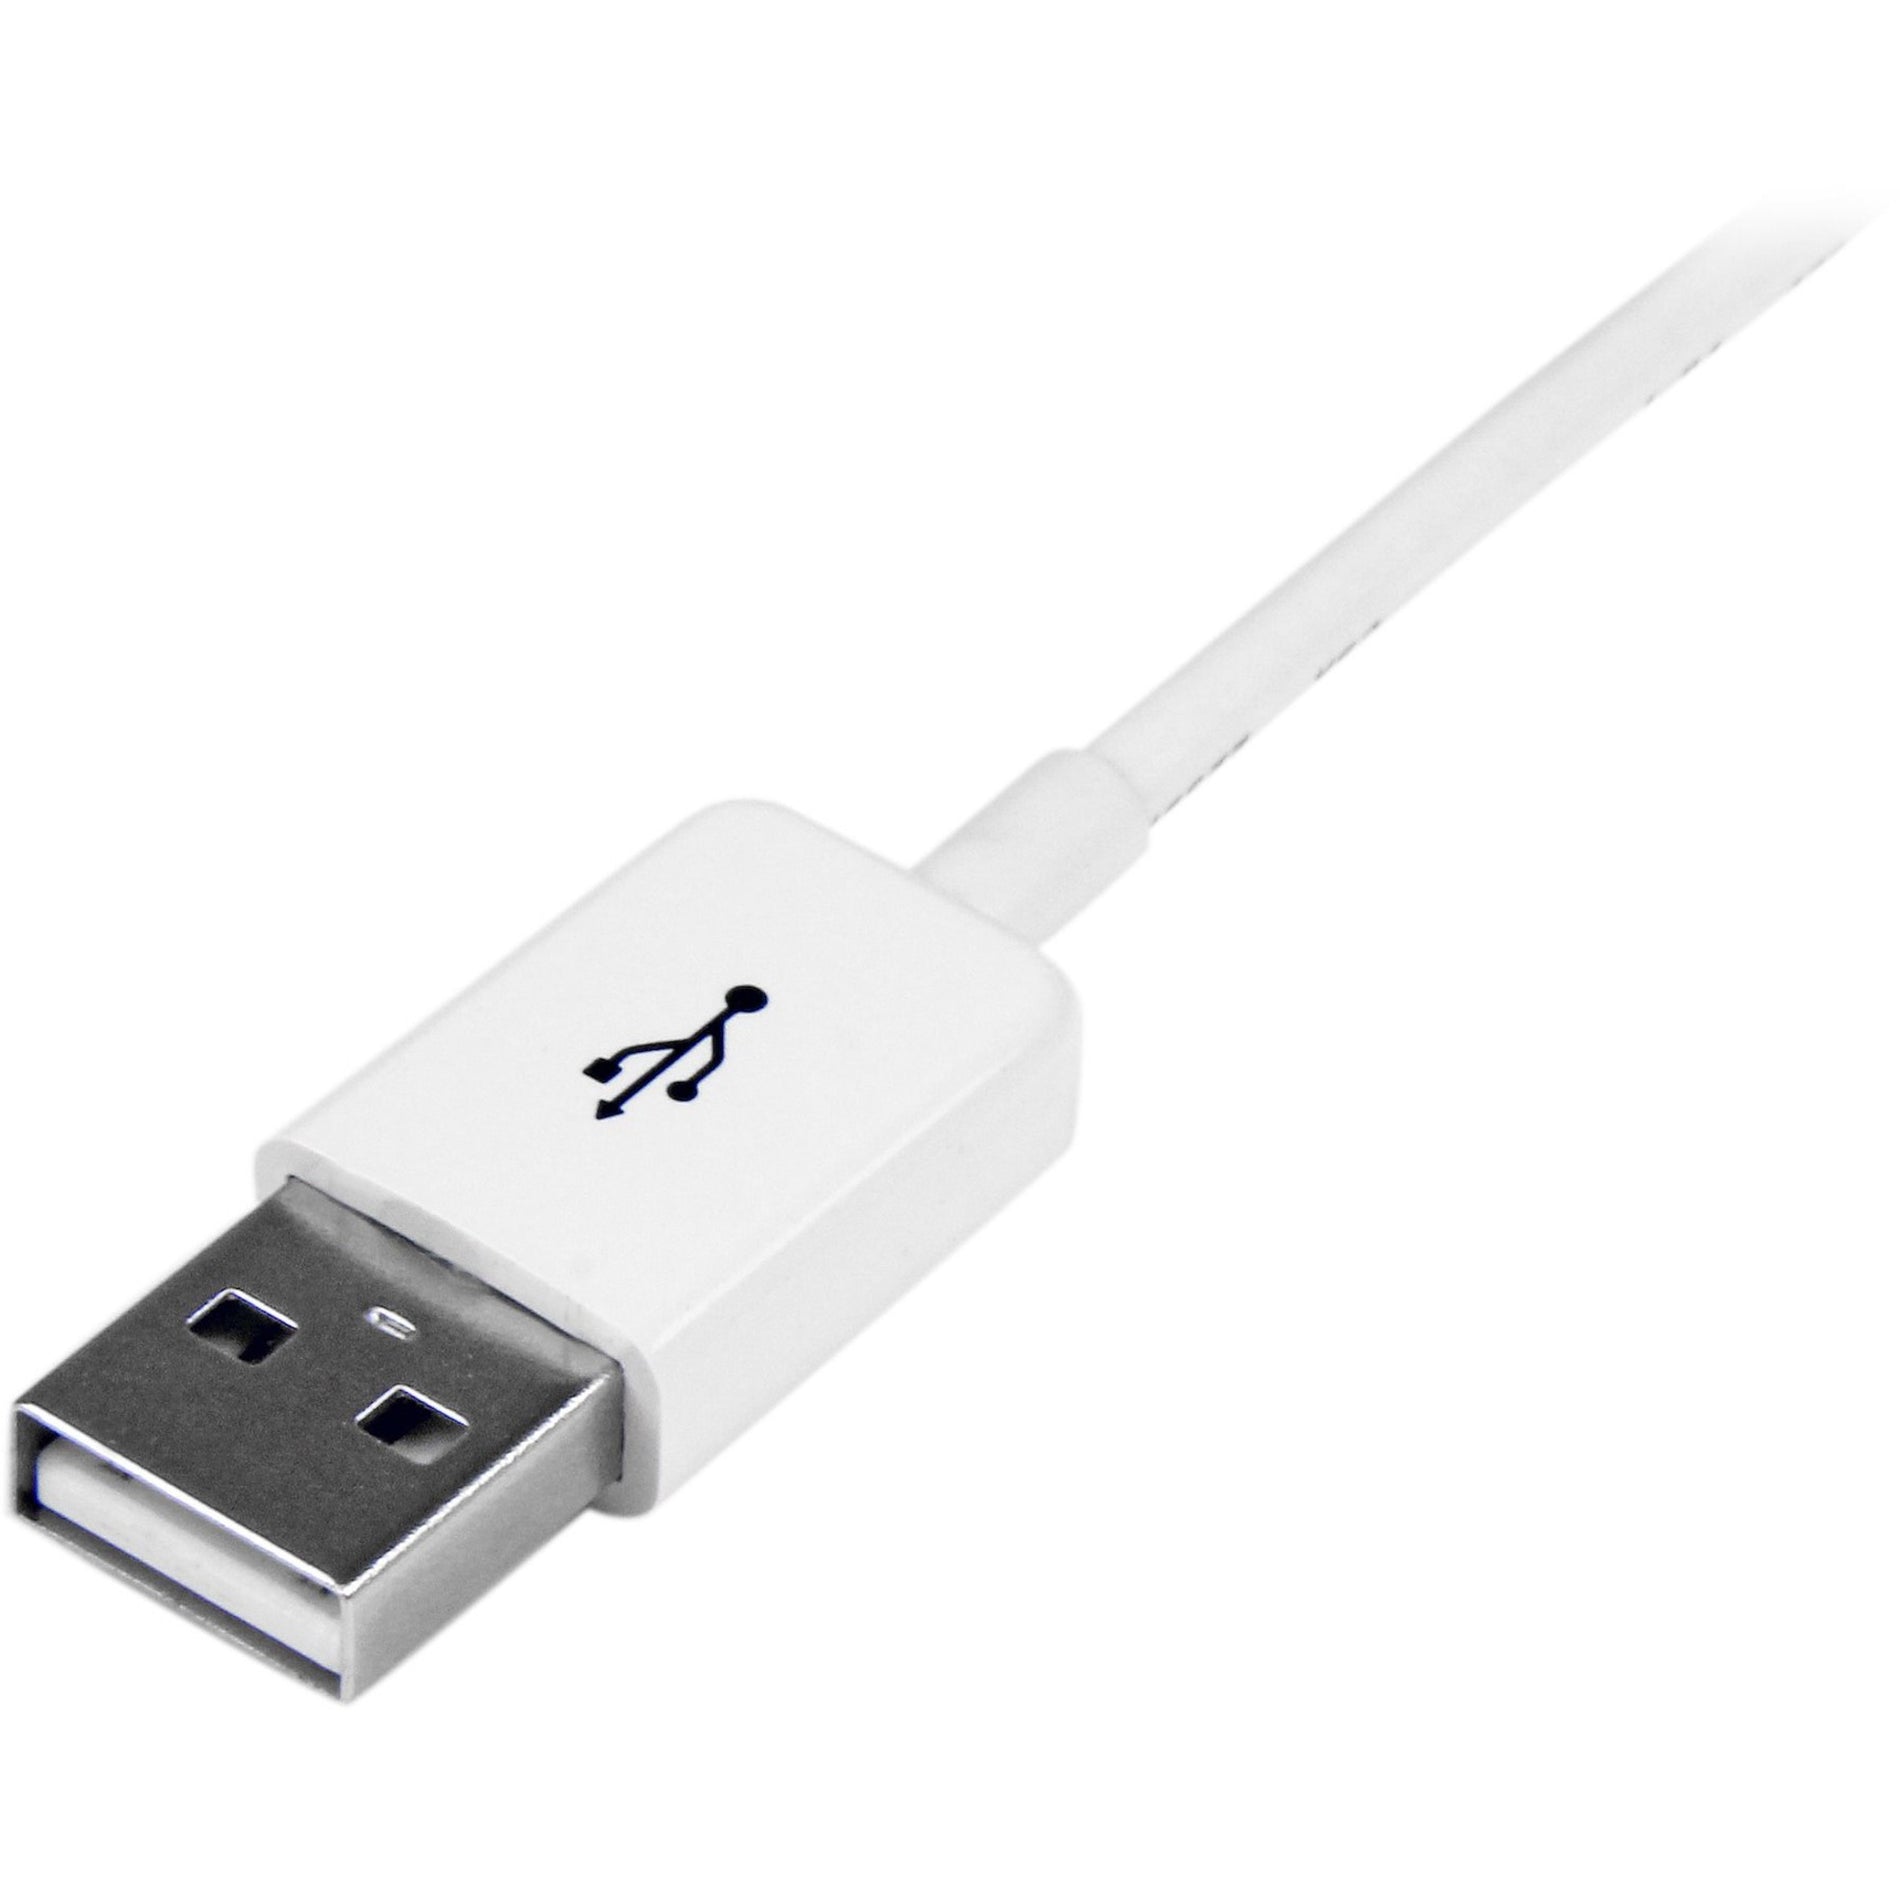 StarTech.com USBEXTPAA1MW 1m White USB 2.0 Extension Cable A to A - M/F, Molded, Strain Relief, Flexible, 480 Mbit/s Data Transfer Rate